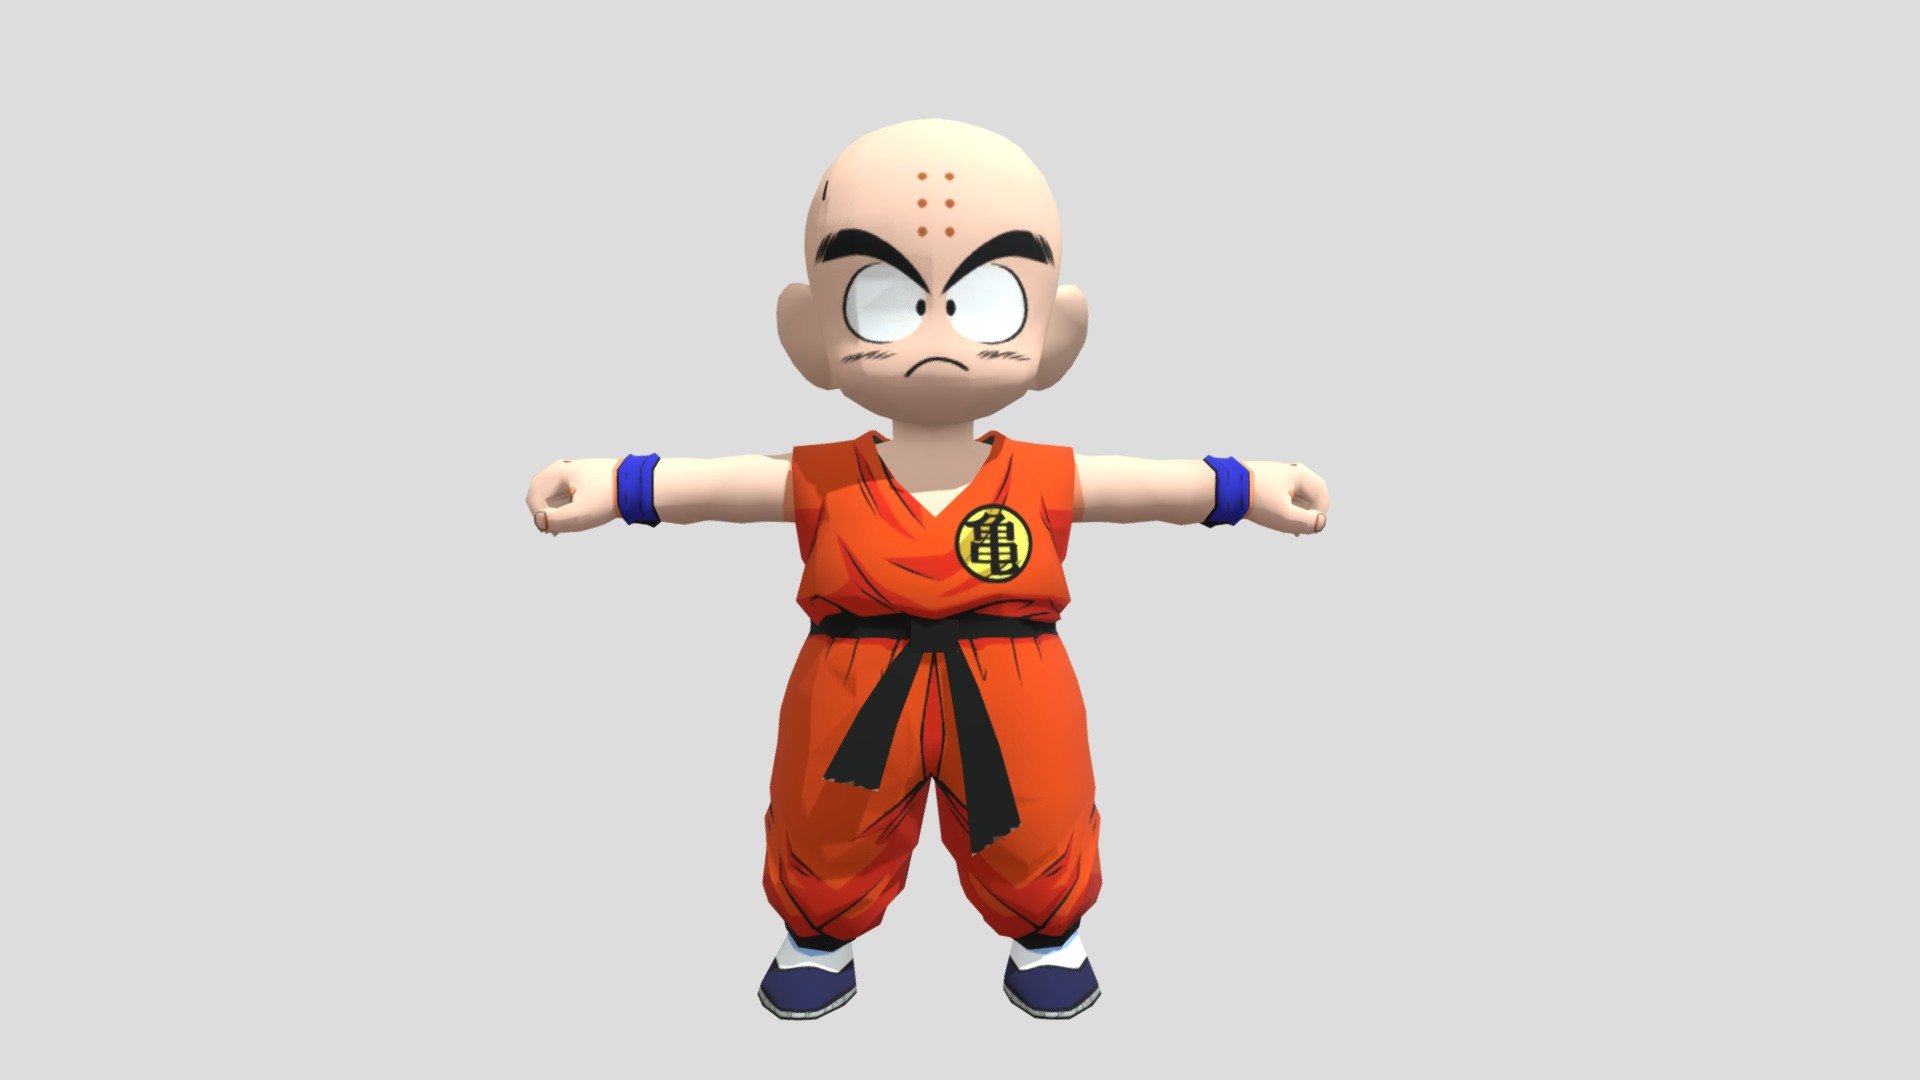 I rigged and paint the skin weights of this Krillin model.


I didn't model this, it was provided by my teacher -

Krillin is a popular character from the anime series francaise call dragonball
This is model is from the time of his early days, as a kid, in training with master roshi during the martial art tournament arc 3d model